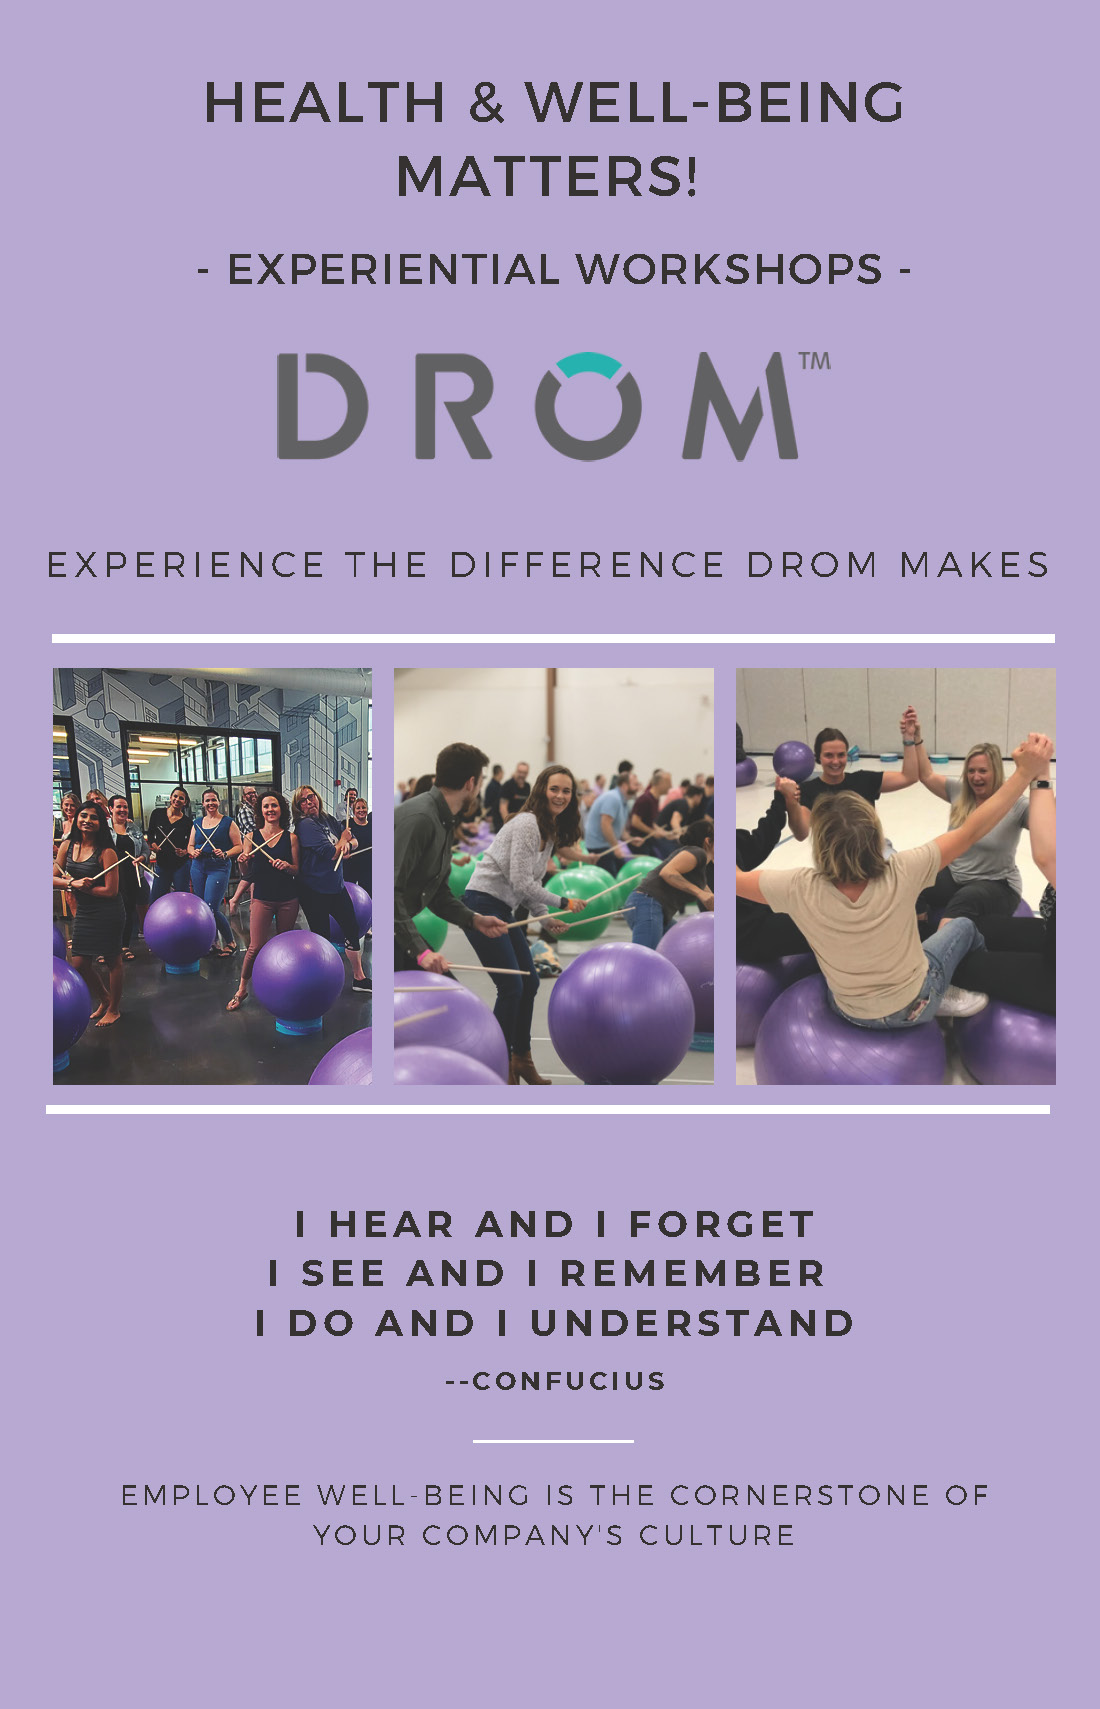 DROM for business team activities 1